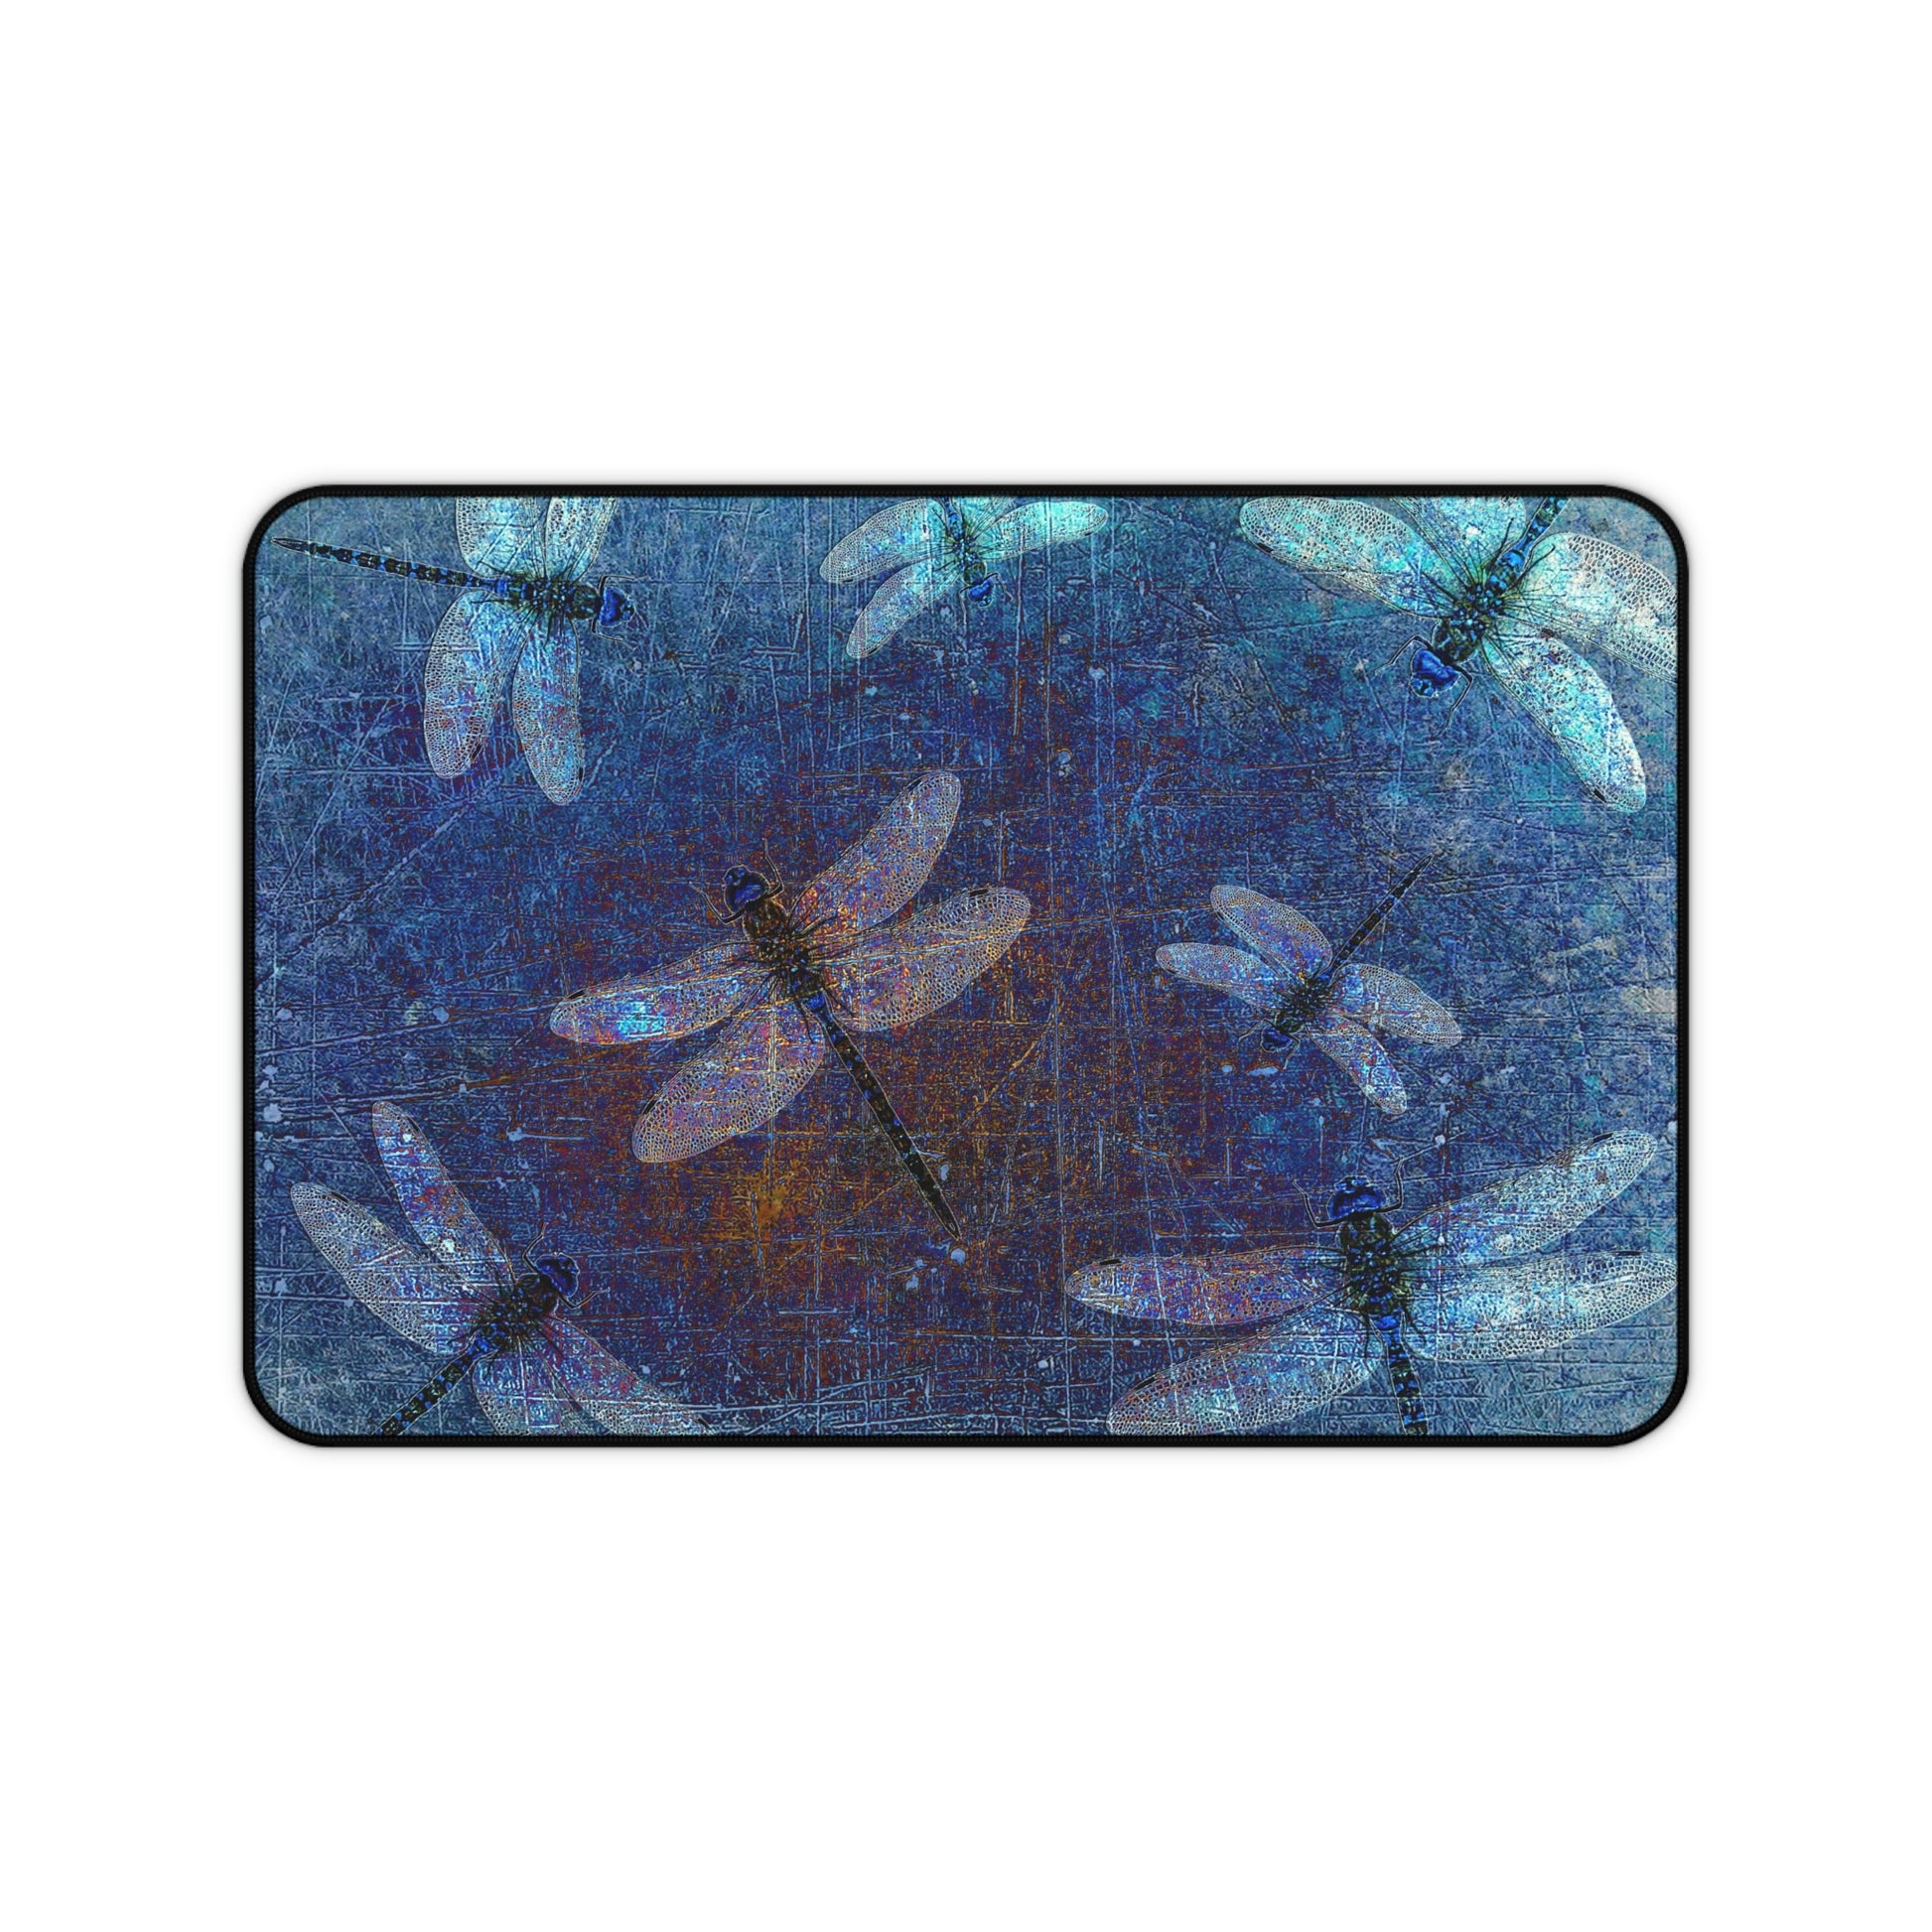 Dragonfly Desk Accessories - Flight of Dragonflies on Distressed Blue Background 12x18